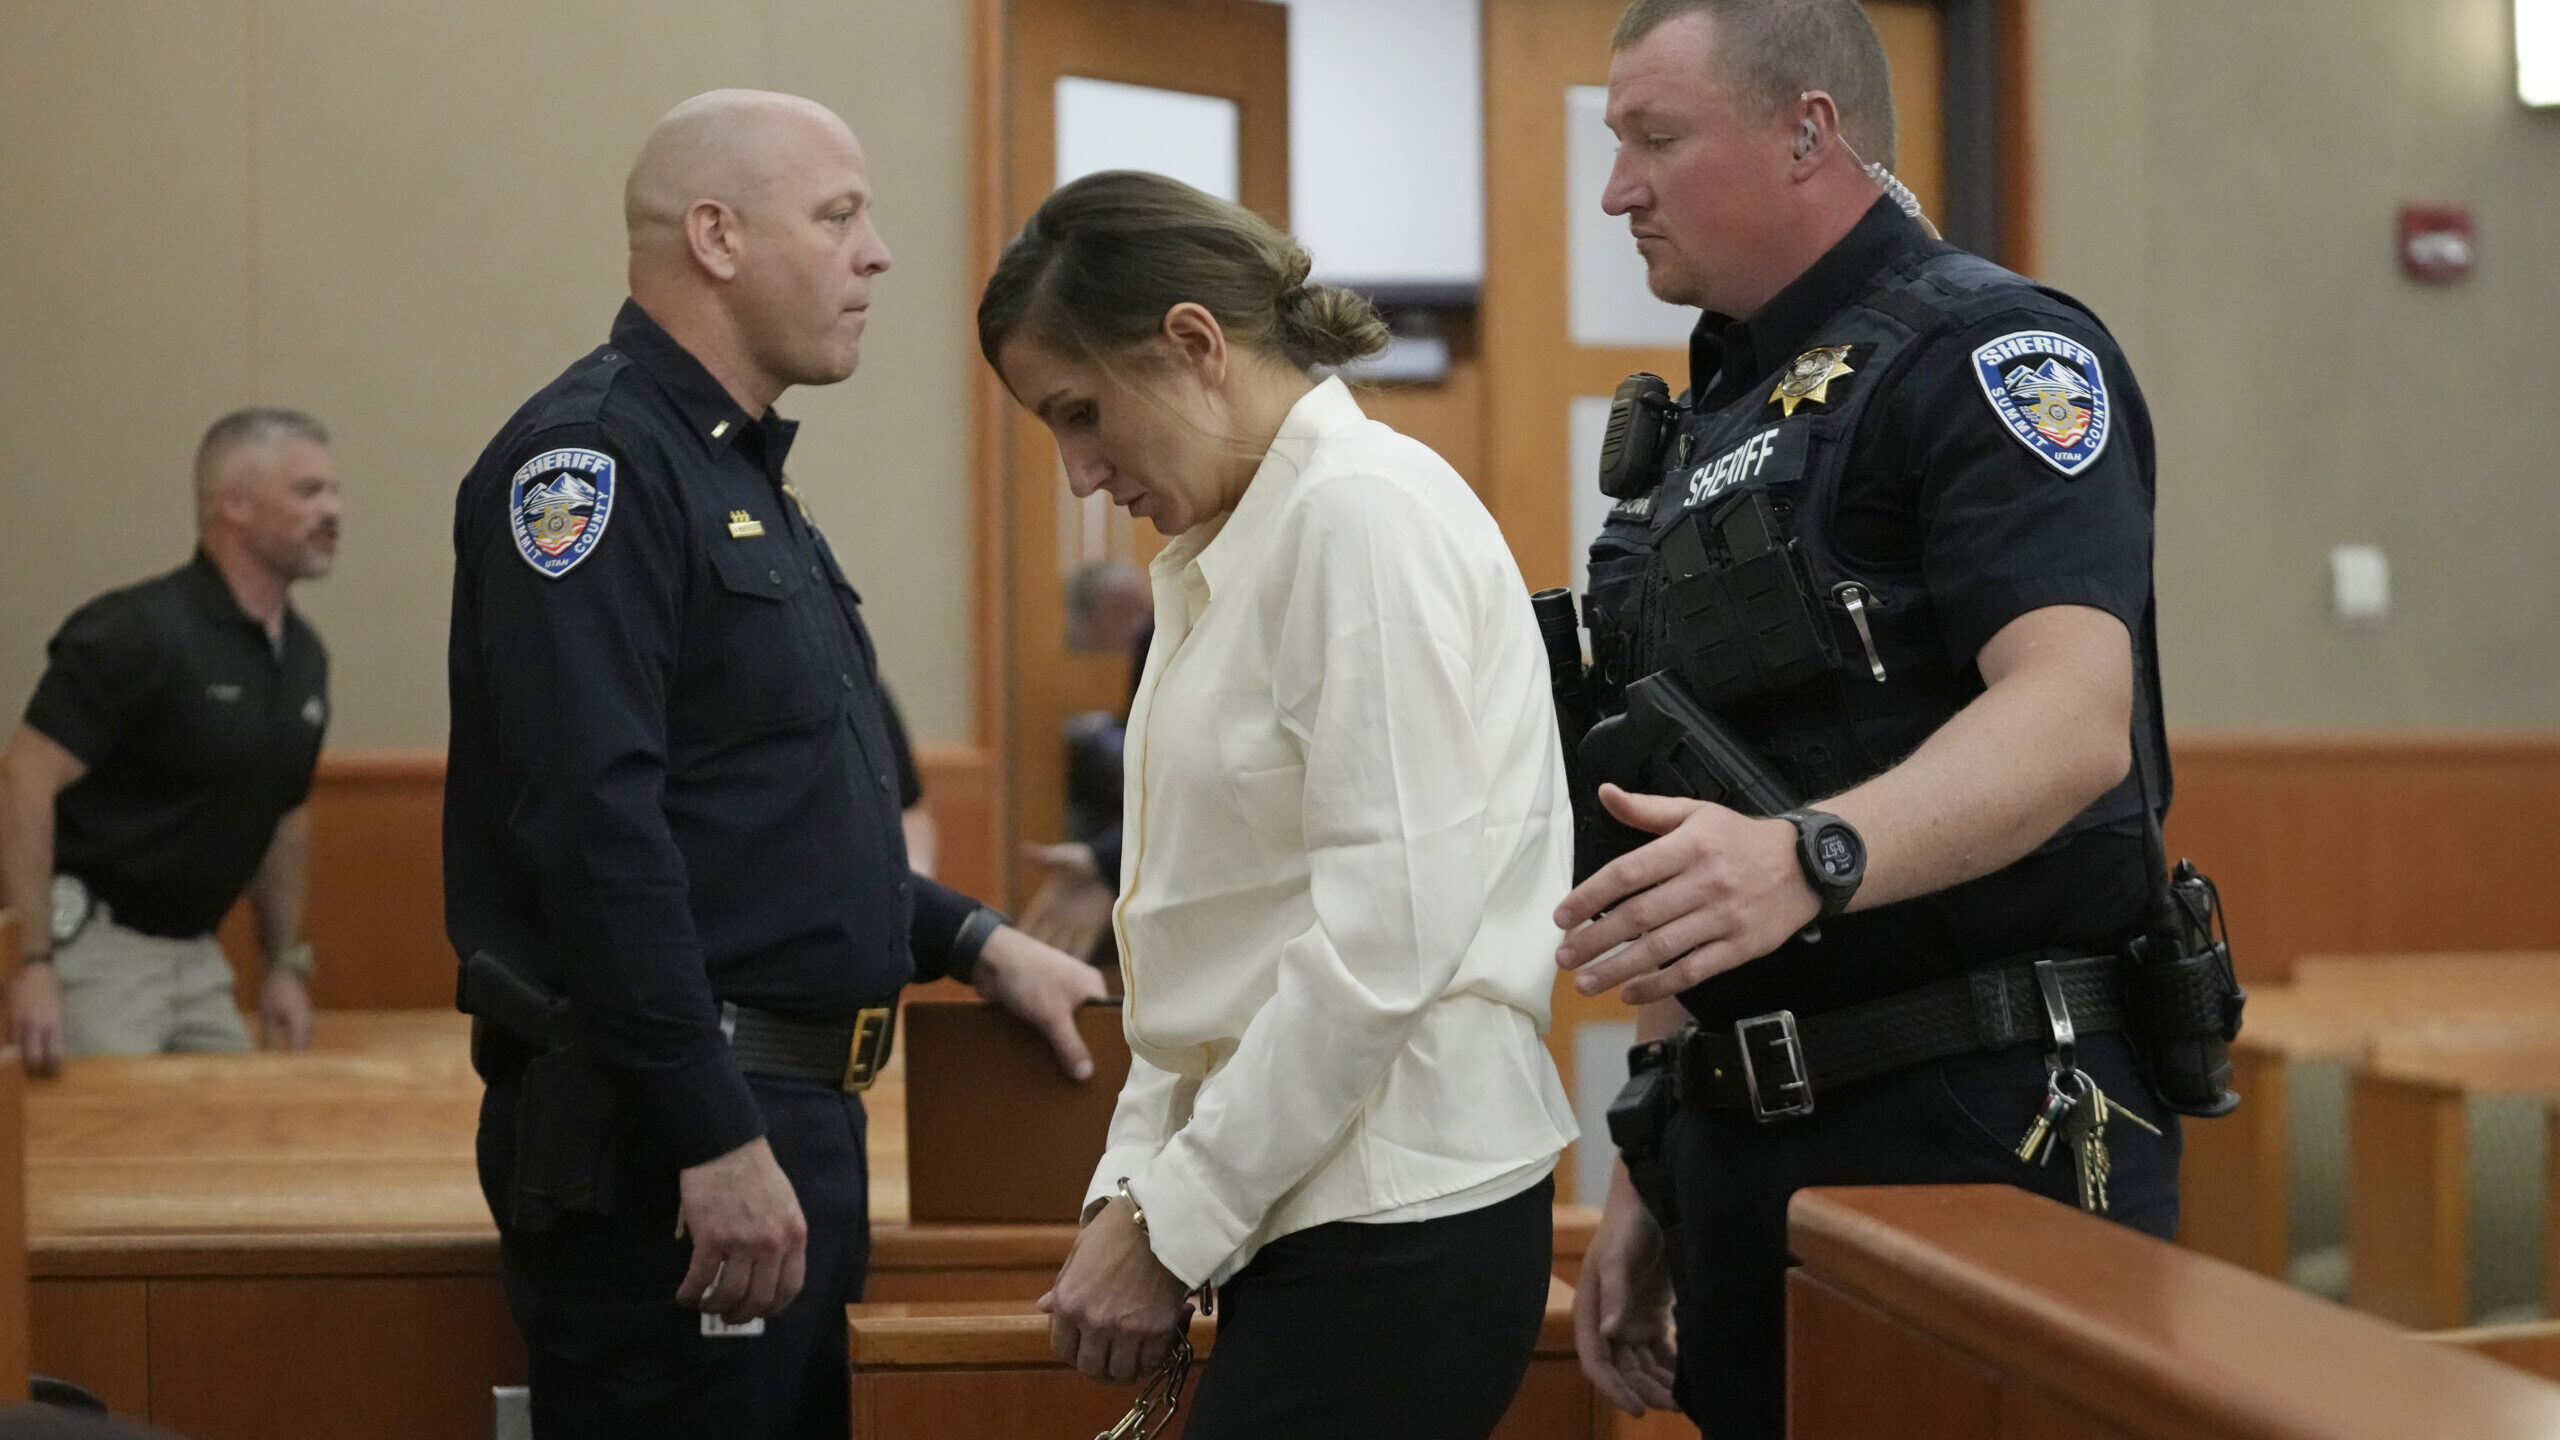 Kouri Richins, a Utah mother of three who authorities say fatally poisoned her husband then wrote a...